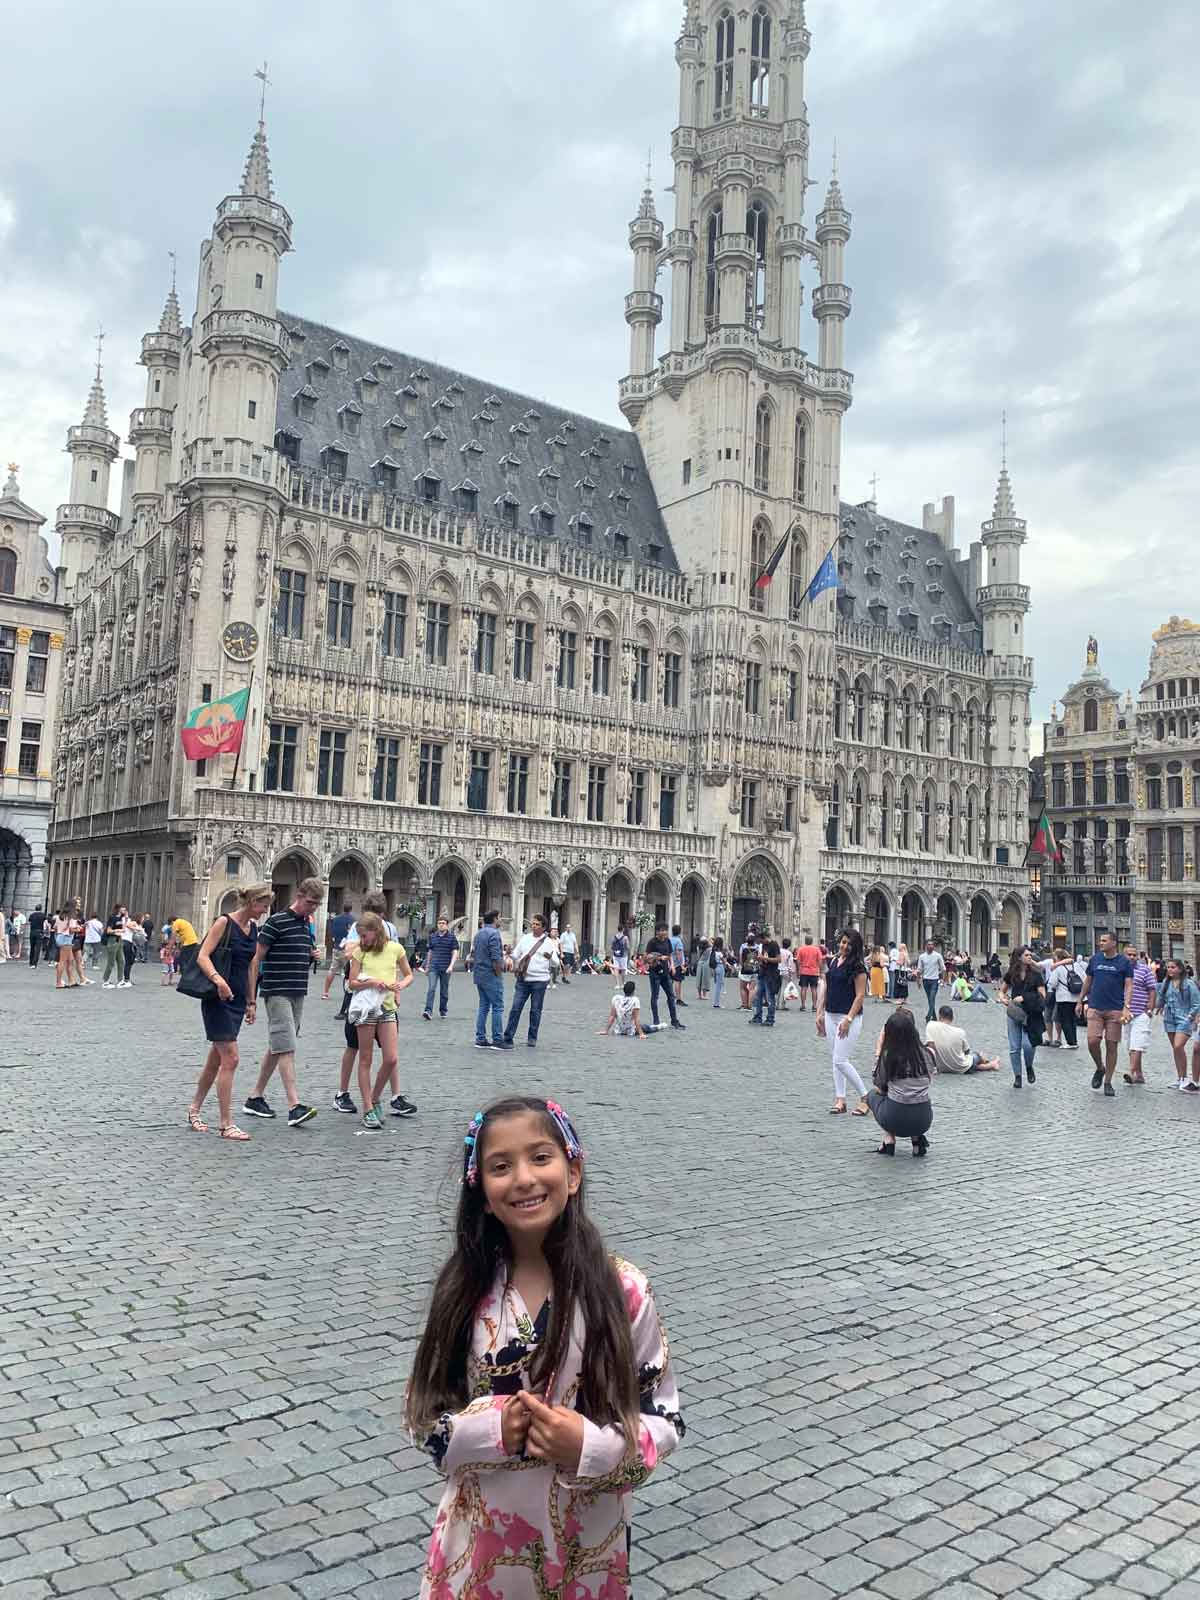 A young girl stands in front of a historic building in Brussels, one of the best places in Belgium for families.